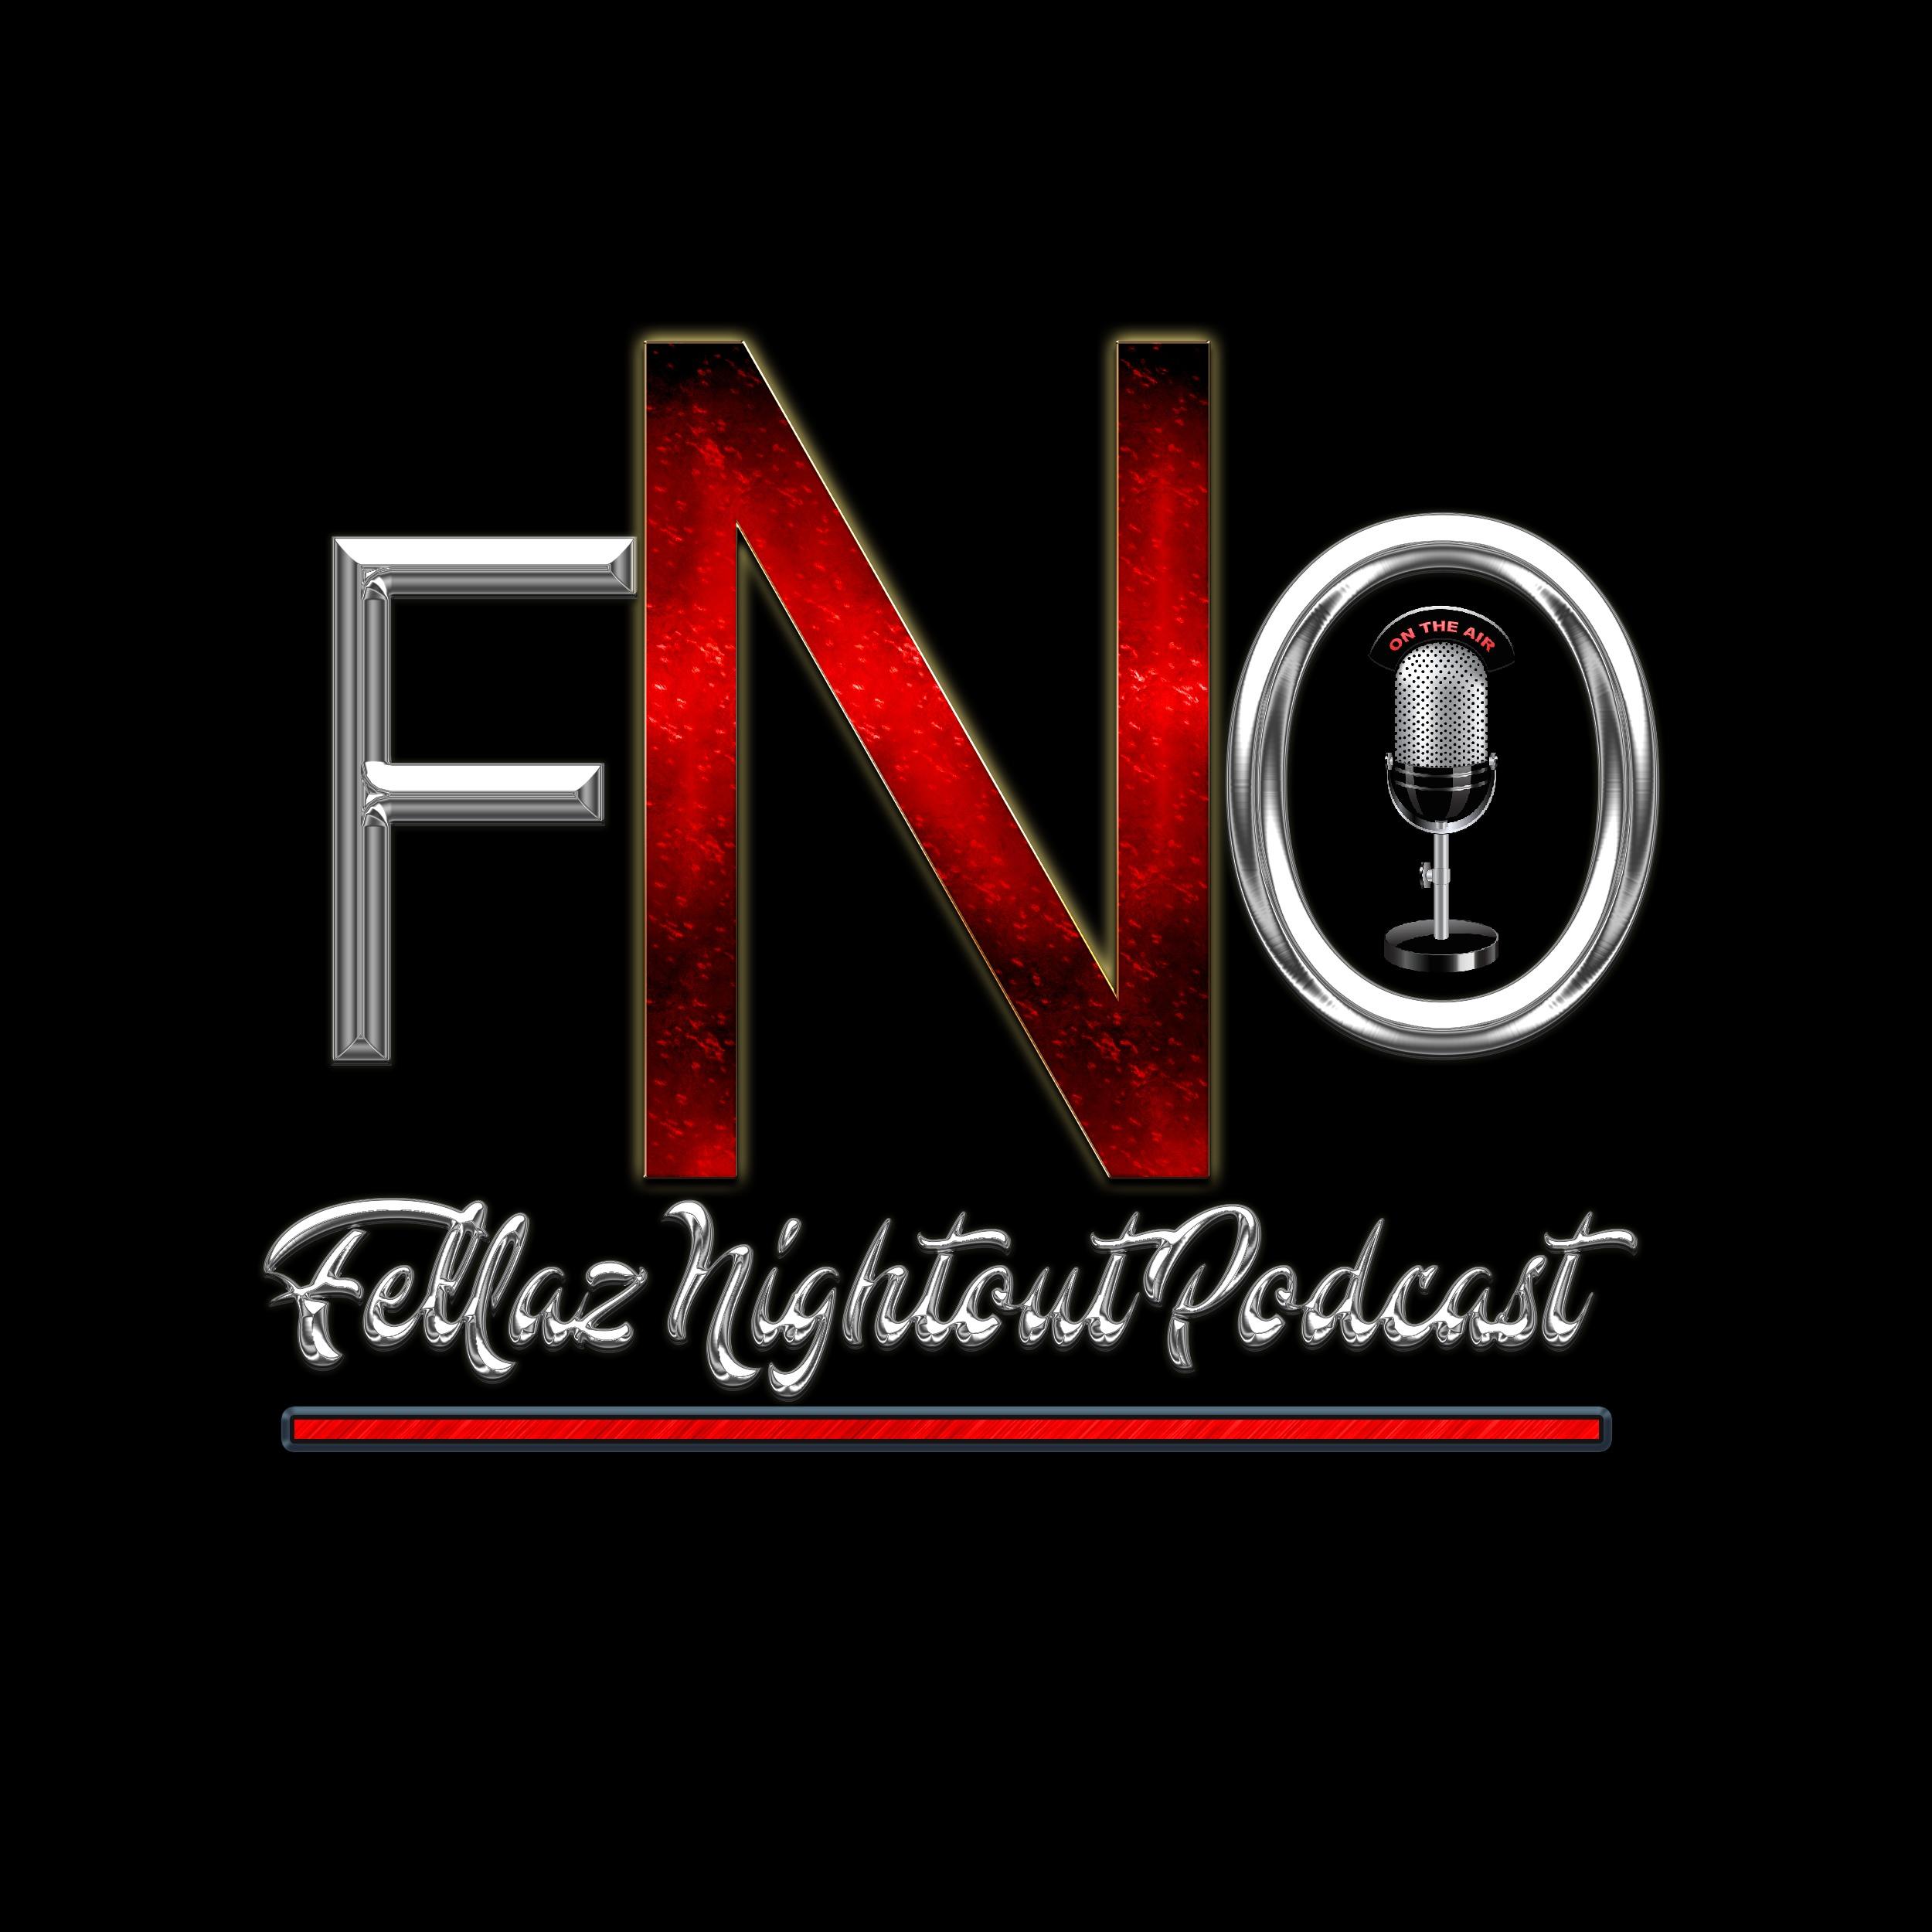 Fellaz Night Out Podcast